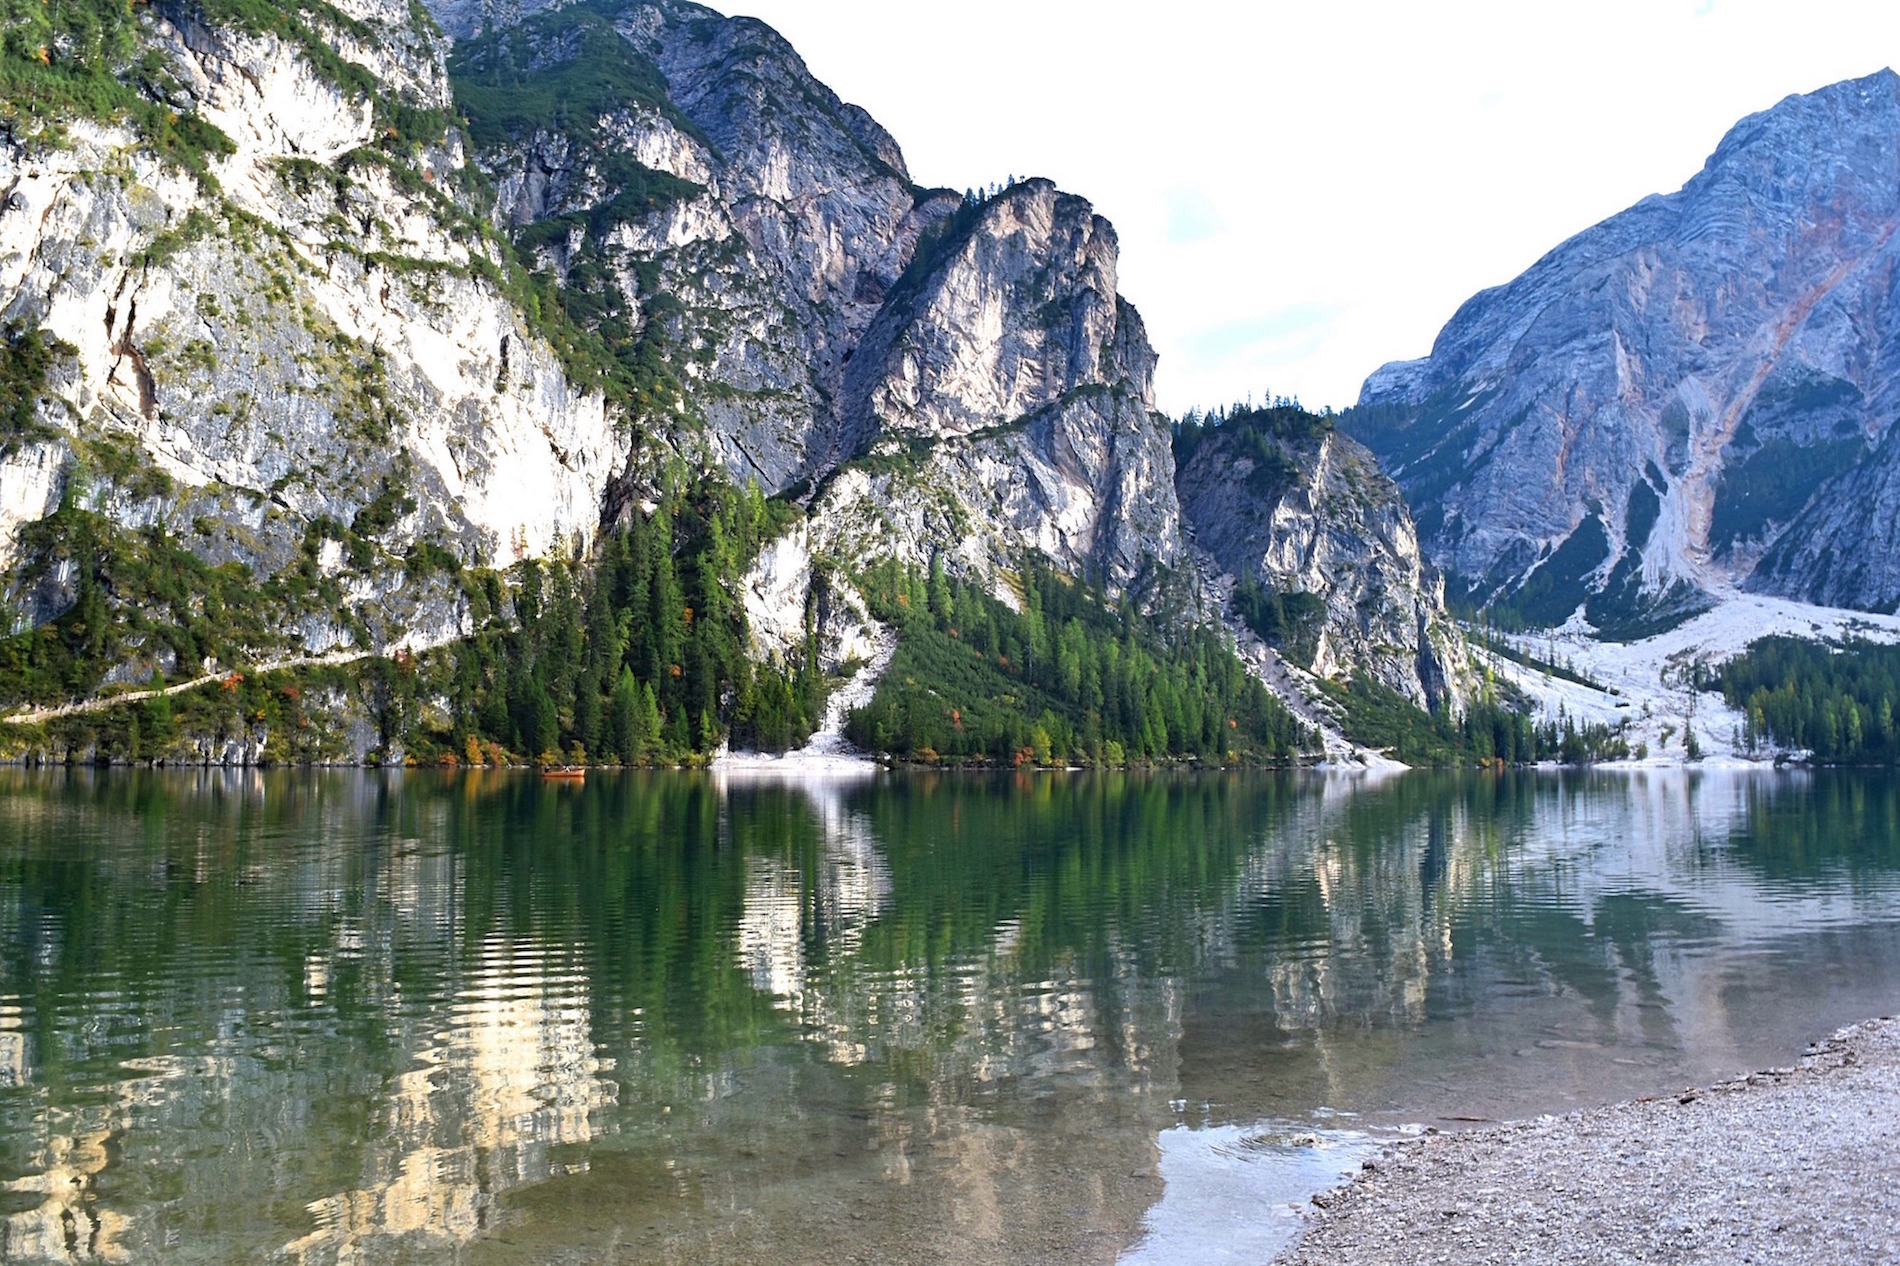 Lago di Braies - one of the best things to do in the Dolomites 